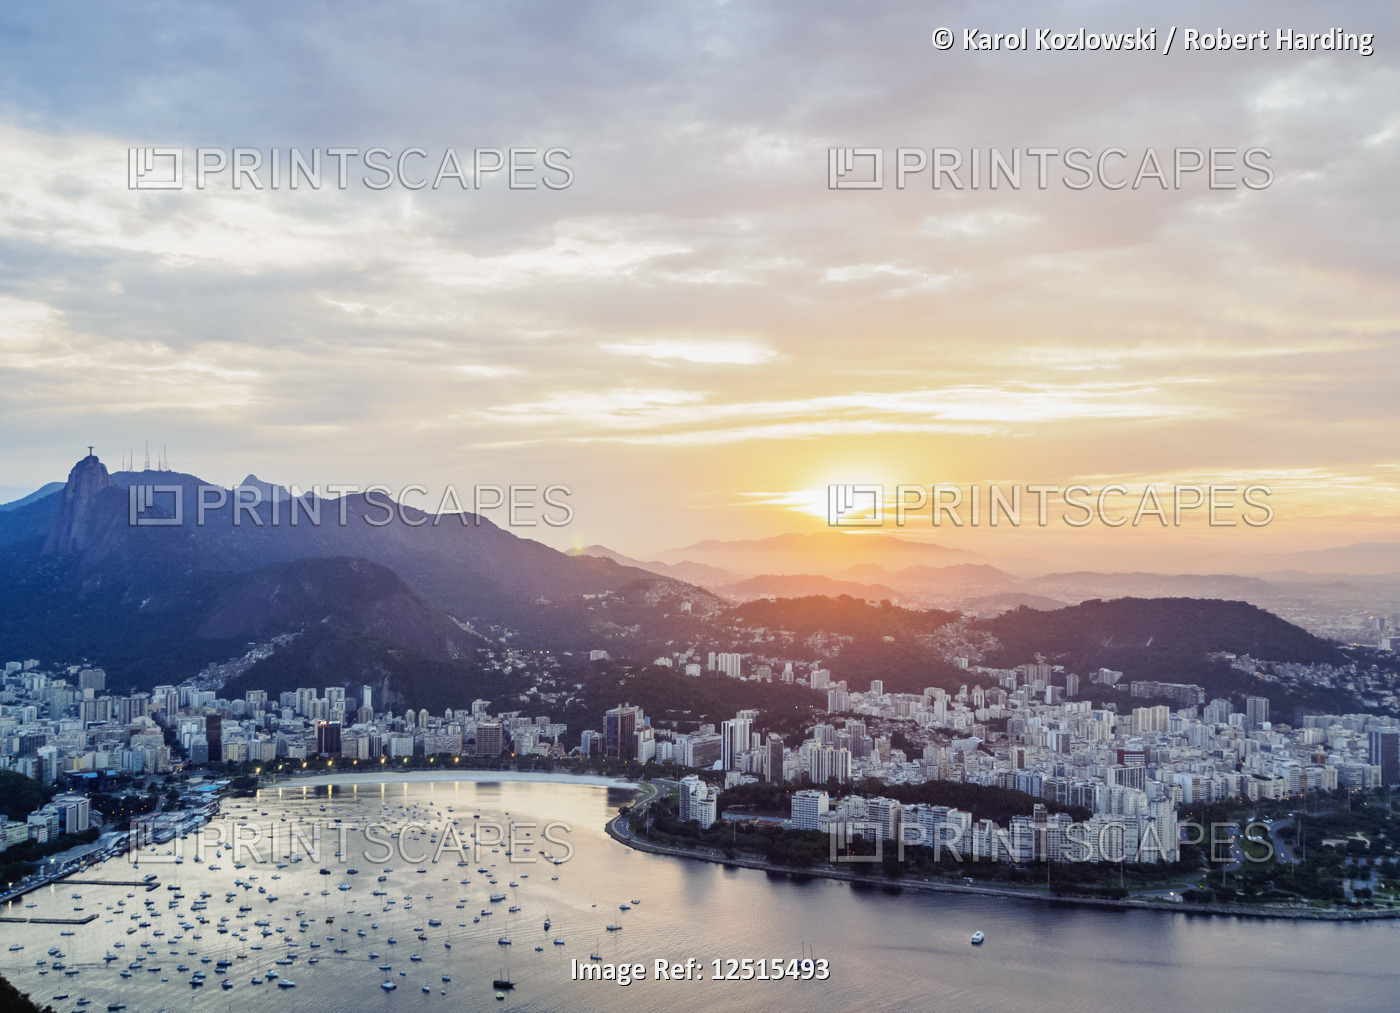 Skyline from the Sugarloaf Mountain at sunset, Rio de Janeiro, Brazil